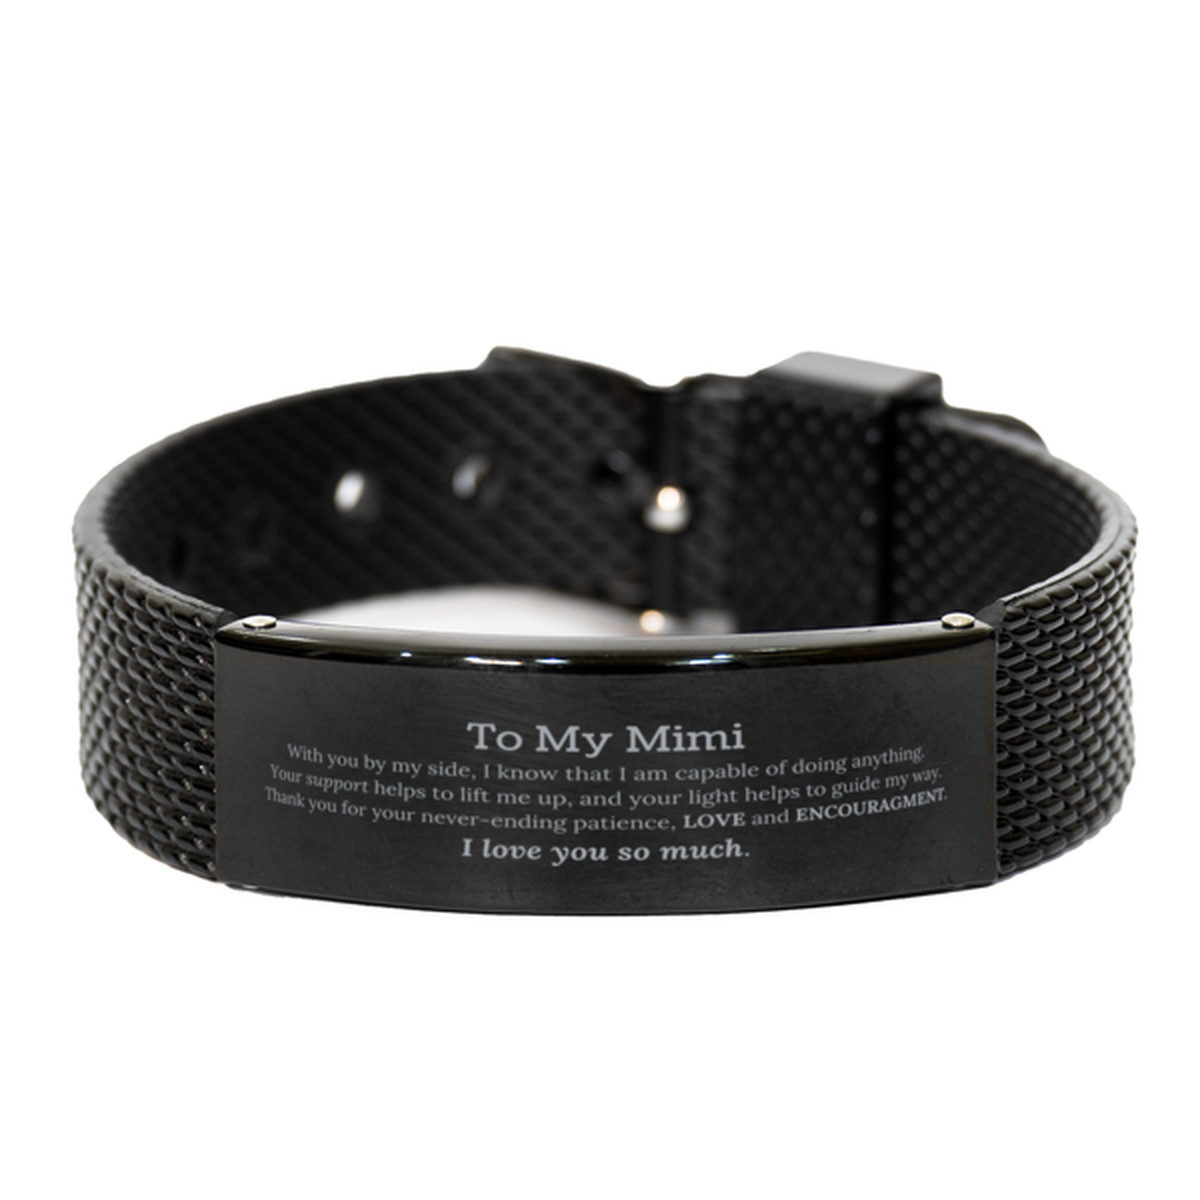 Appreciation Mimi Black Shark Mesh Bracelet Gifts, To My Mimi Birthday Christmas Wedding Keepsake Gifts for Mimi With you by my side, I know that I am capable of doing anything. I love you so much